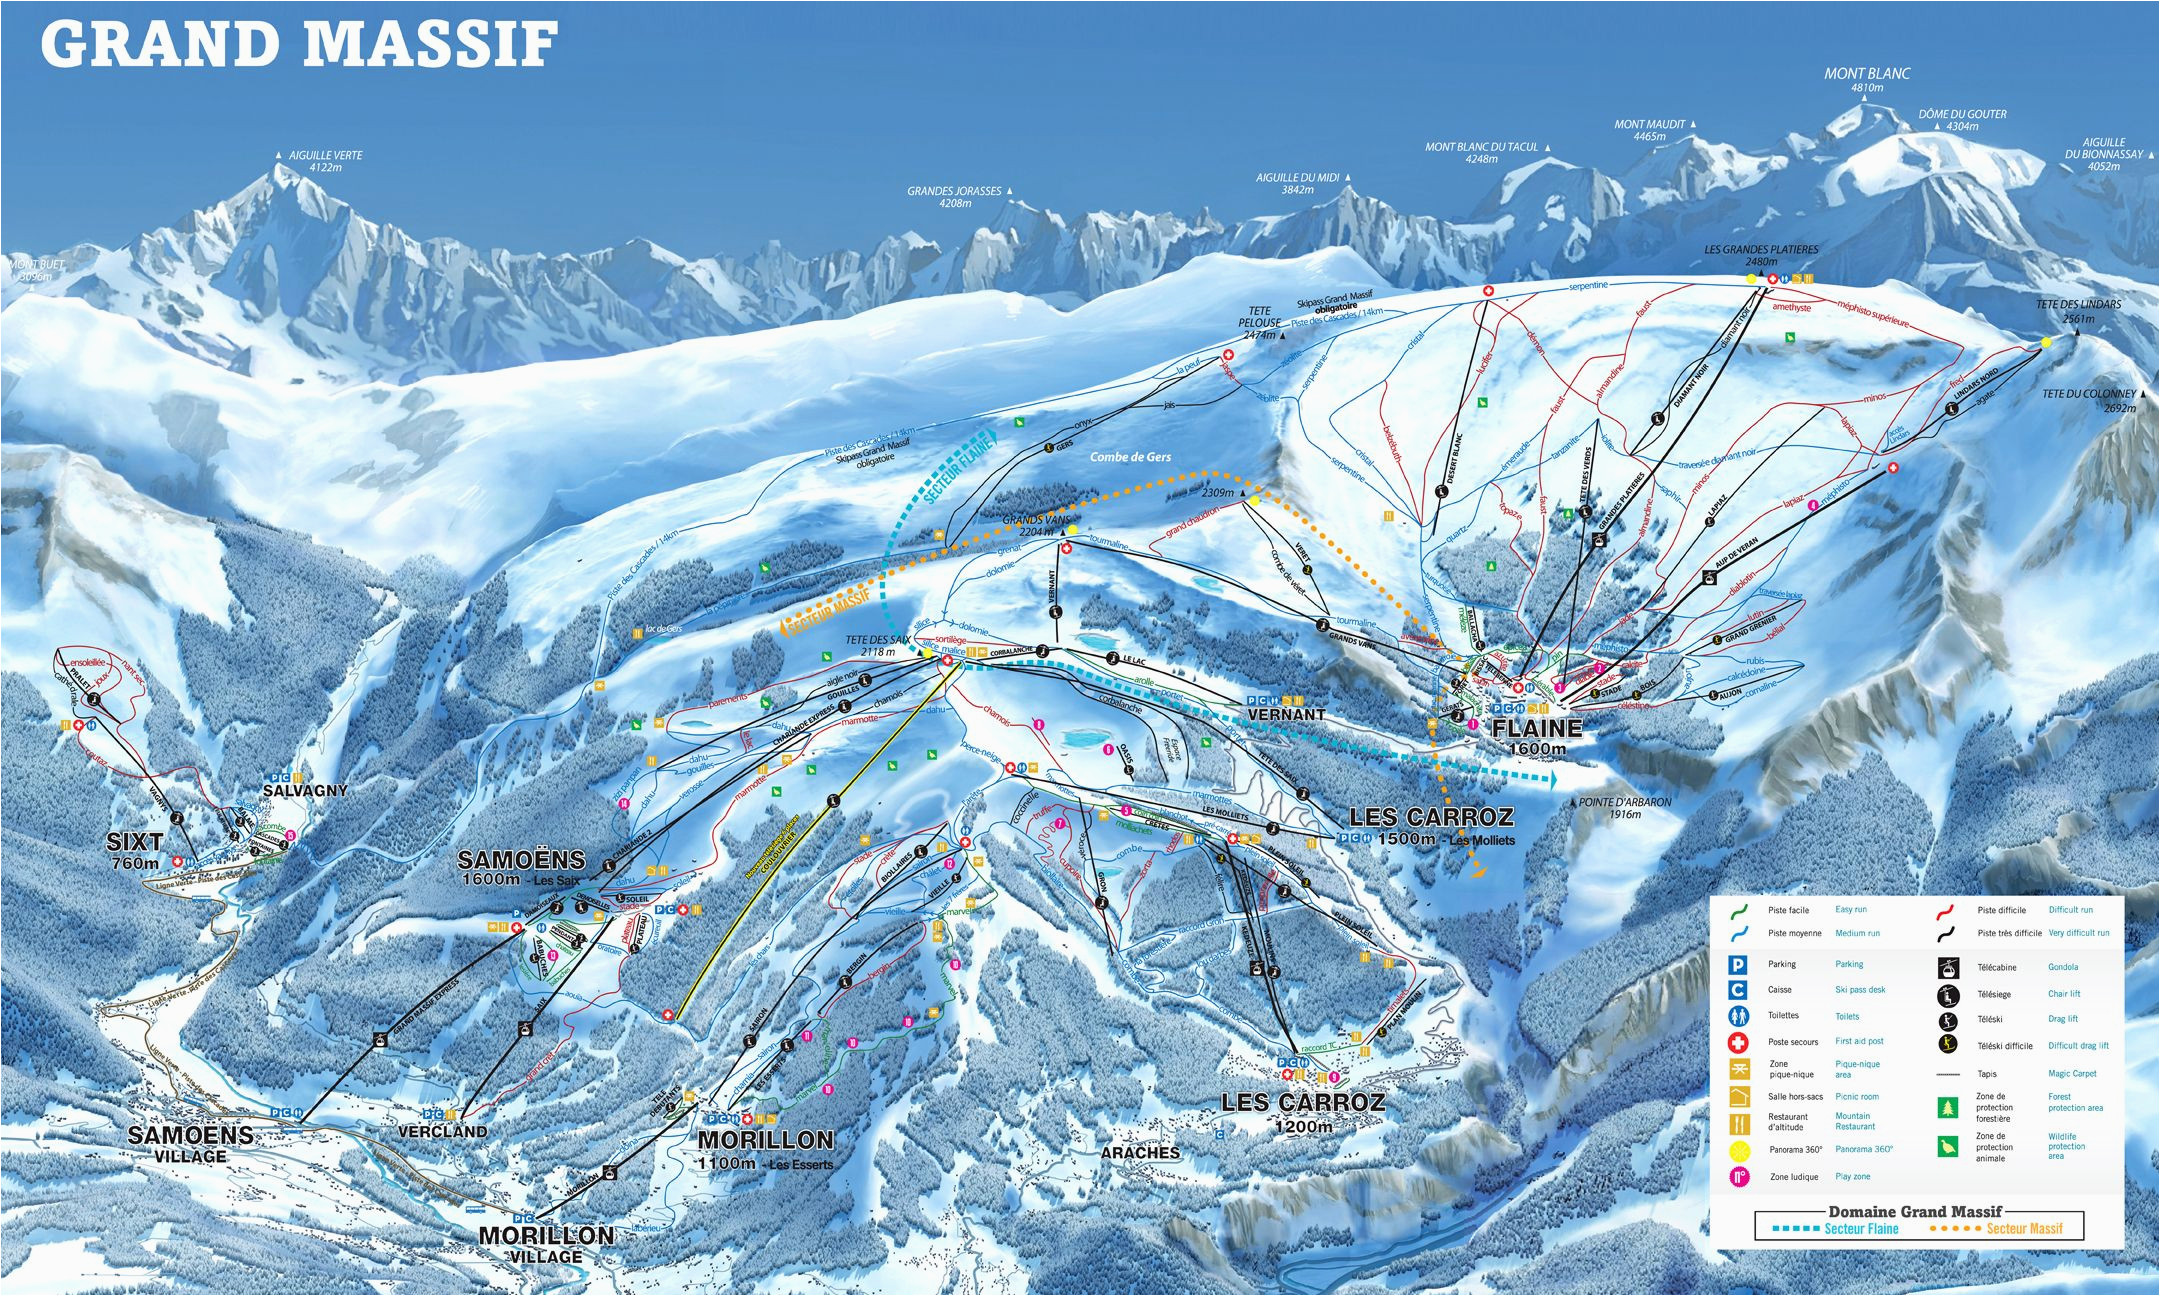 grand massif piste map canvas print in 2019 ski and snowboarding